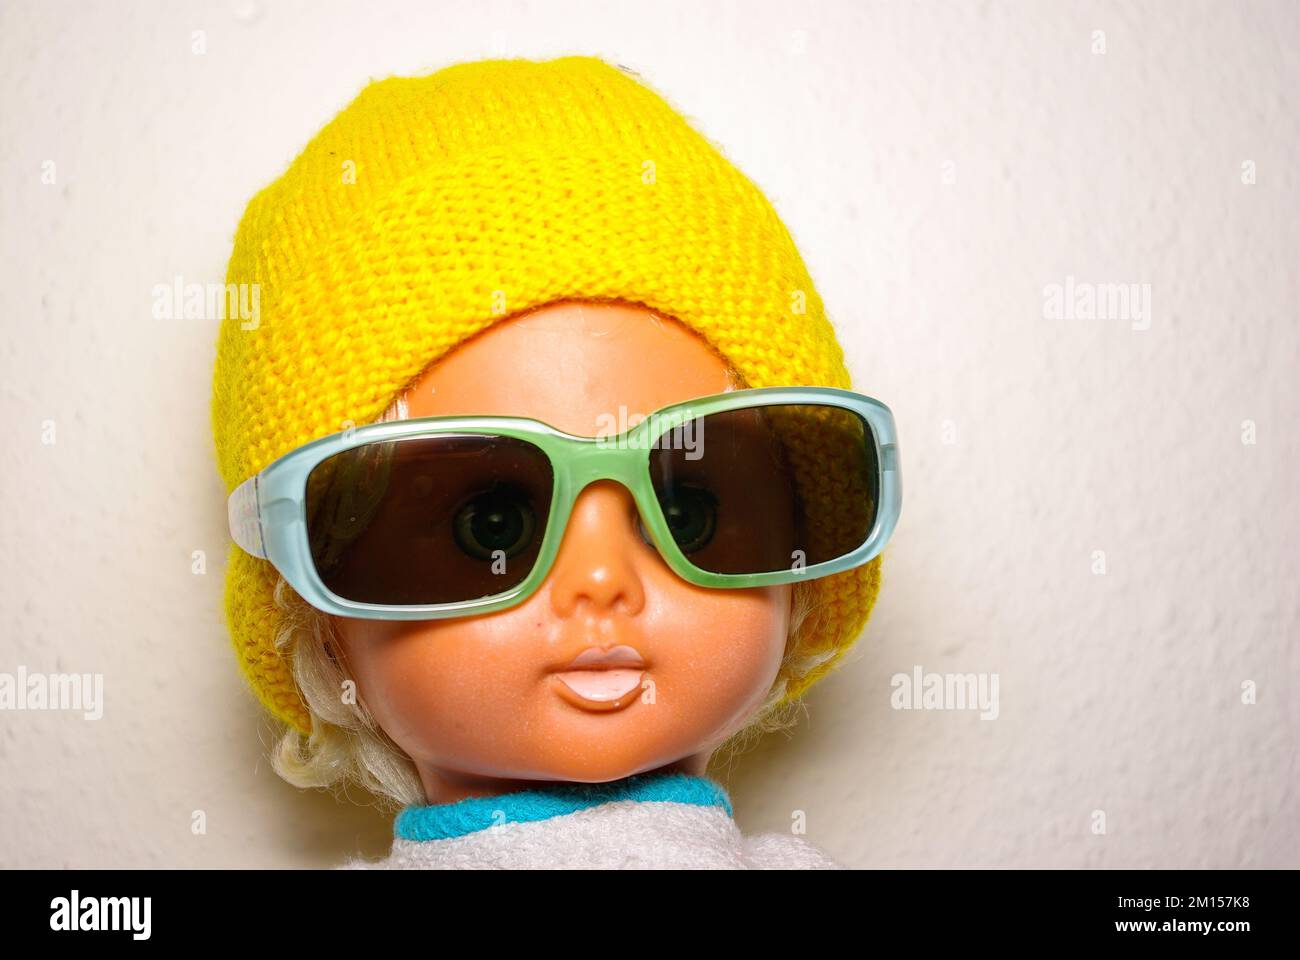 Smart doll with sunglasses and yellow knitted cap, children's toy from the GDR of the 1970s, concept of childlike play and human expression. Stock Photo